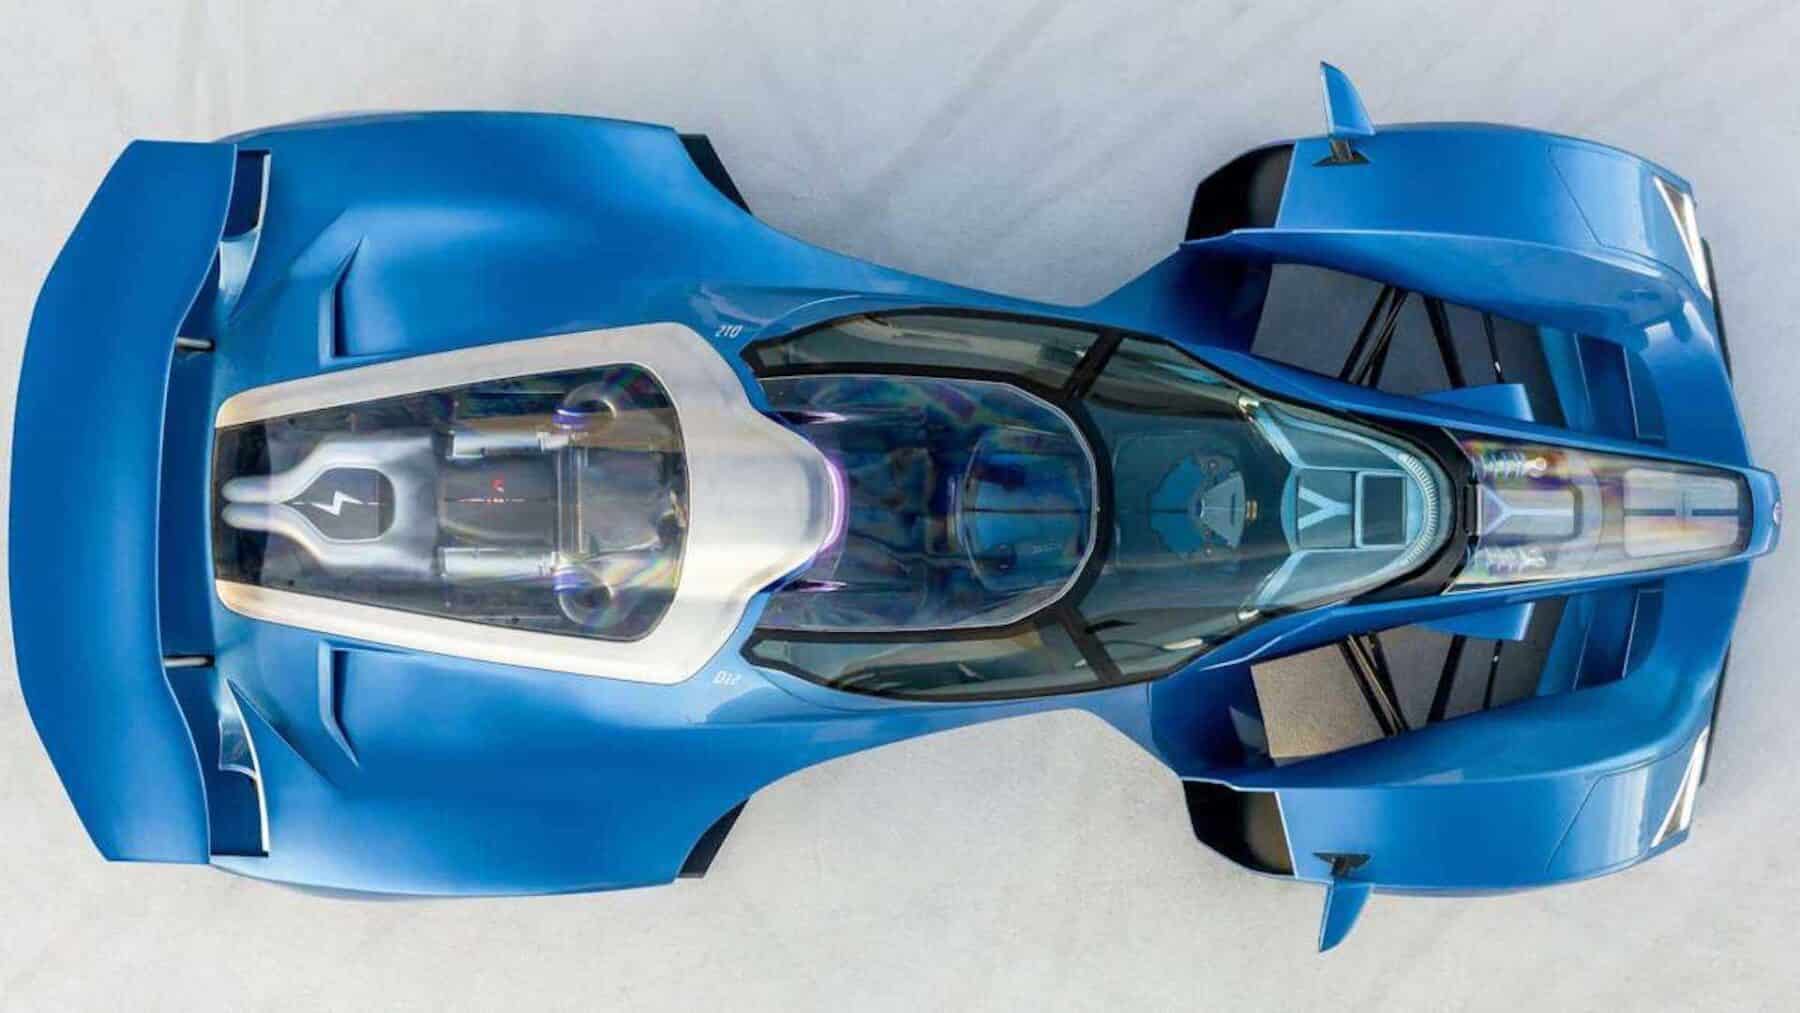 After almost 70 years of hiatus Delage returns with a sports V12 hybrid of more than 1,000 hp